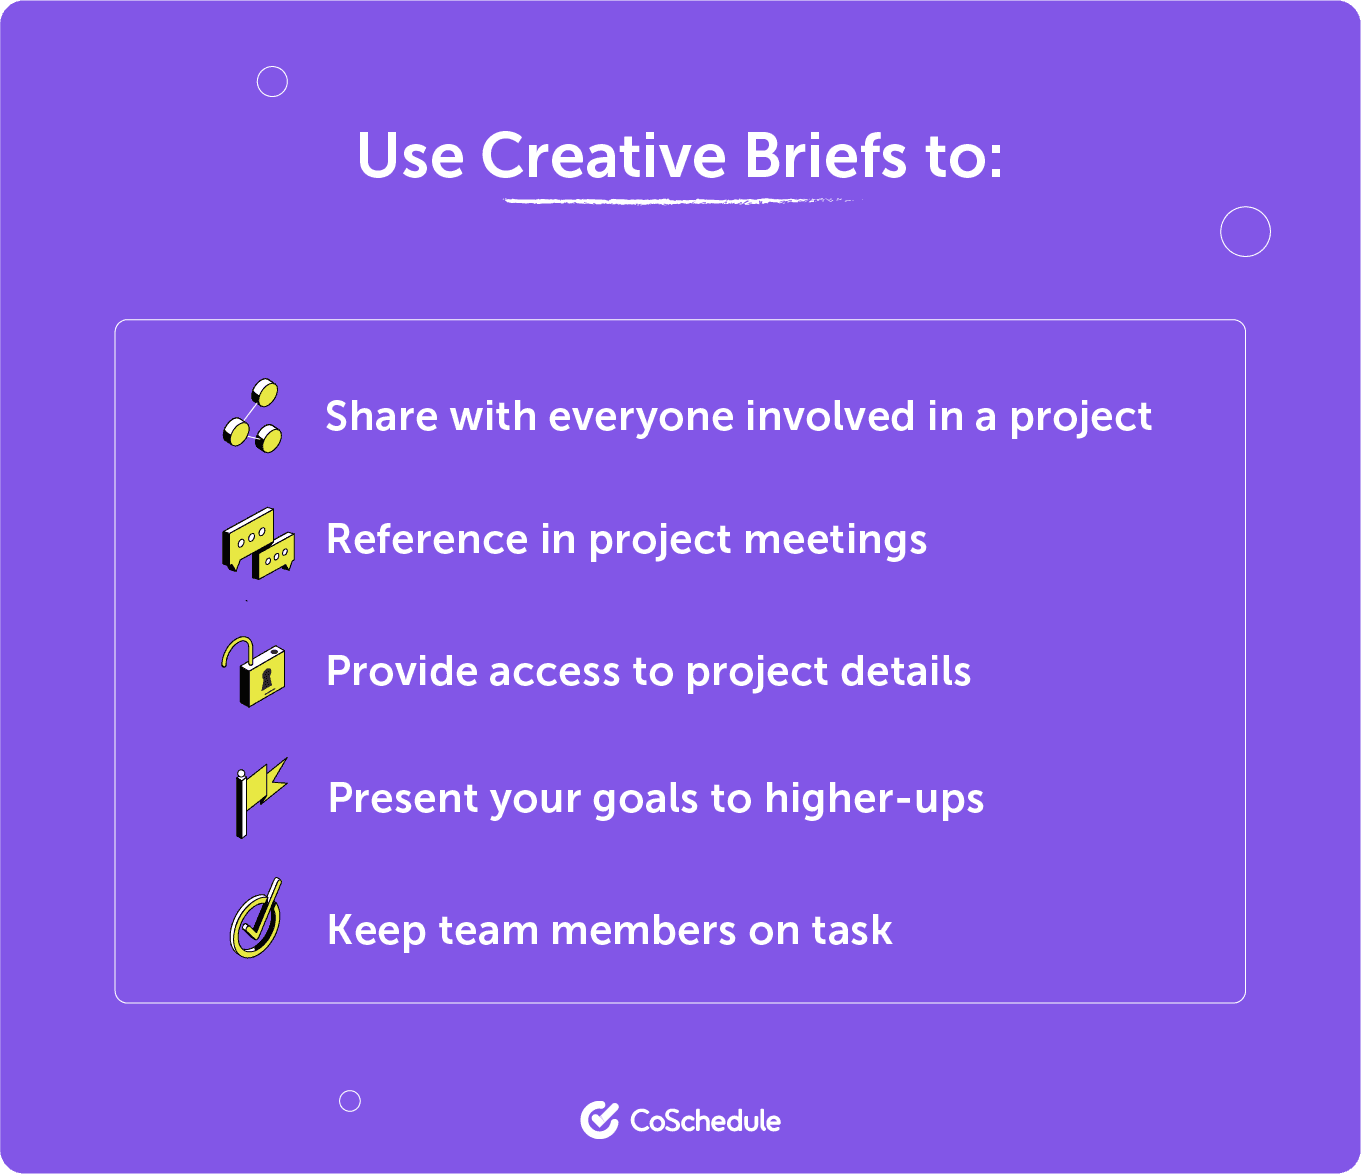 How to use creative briefs